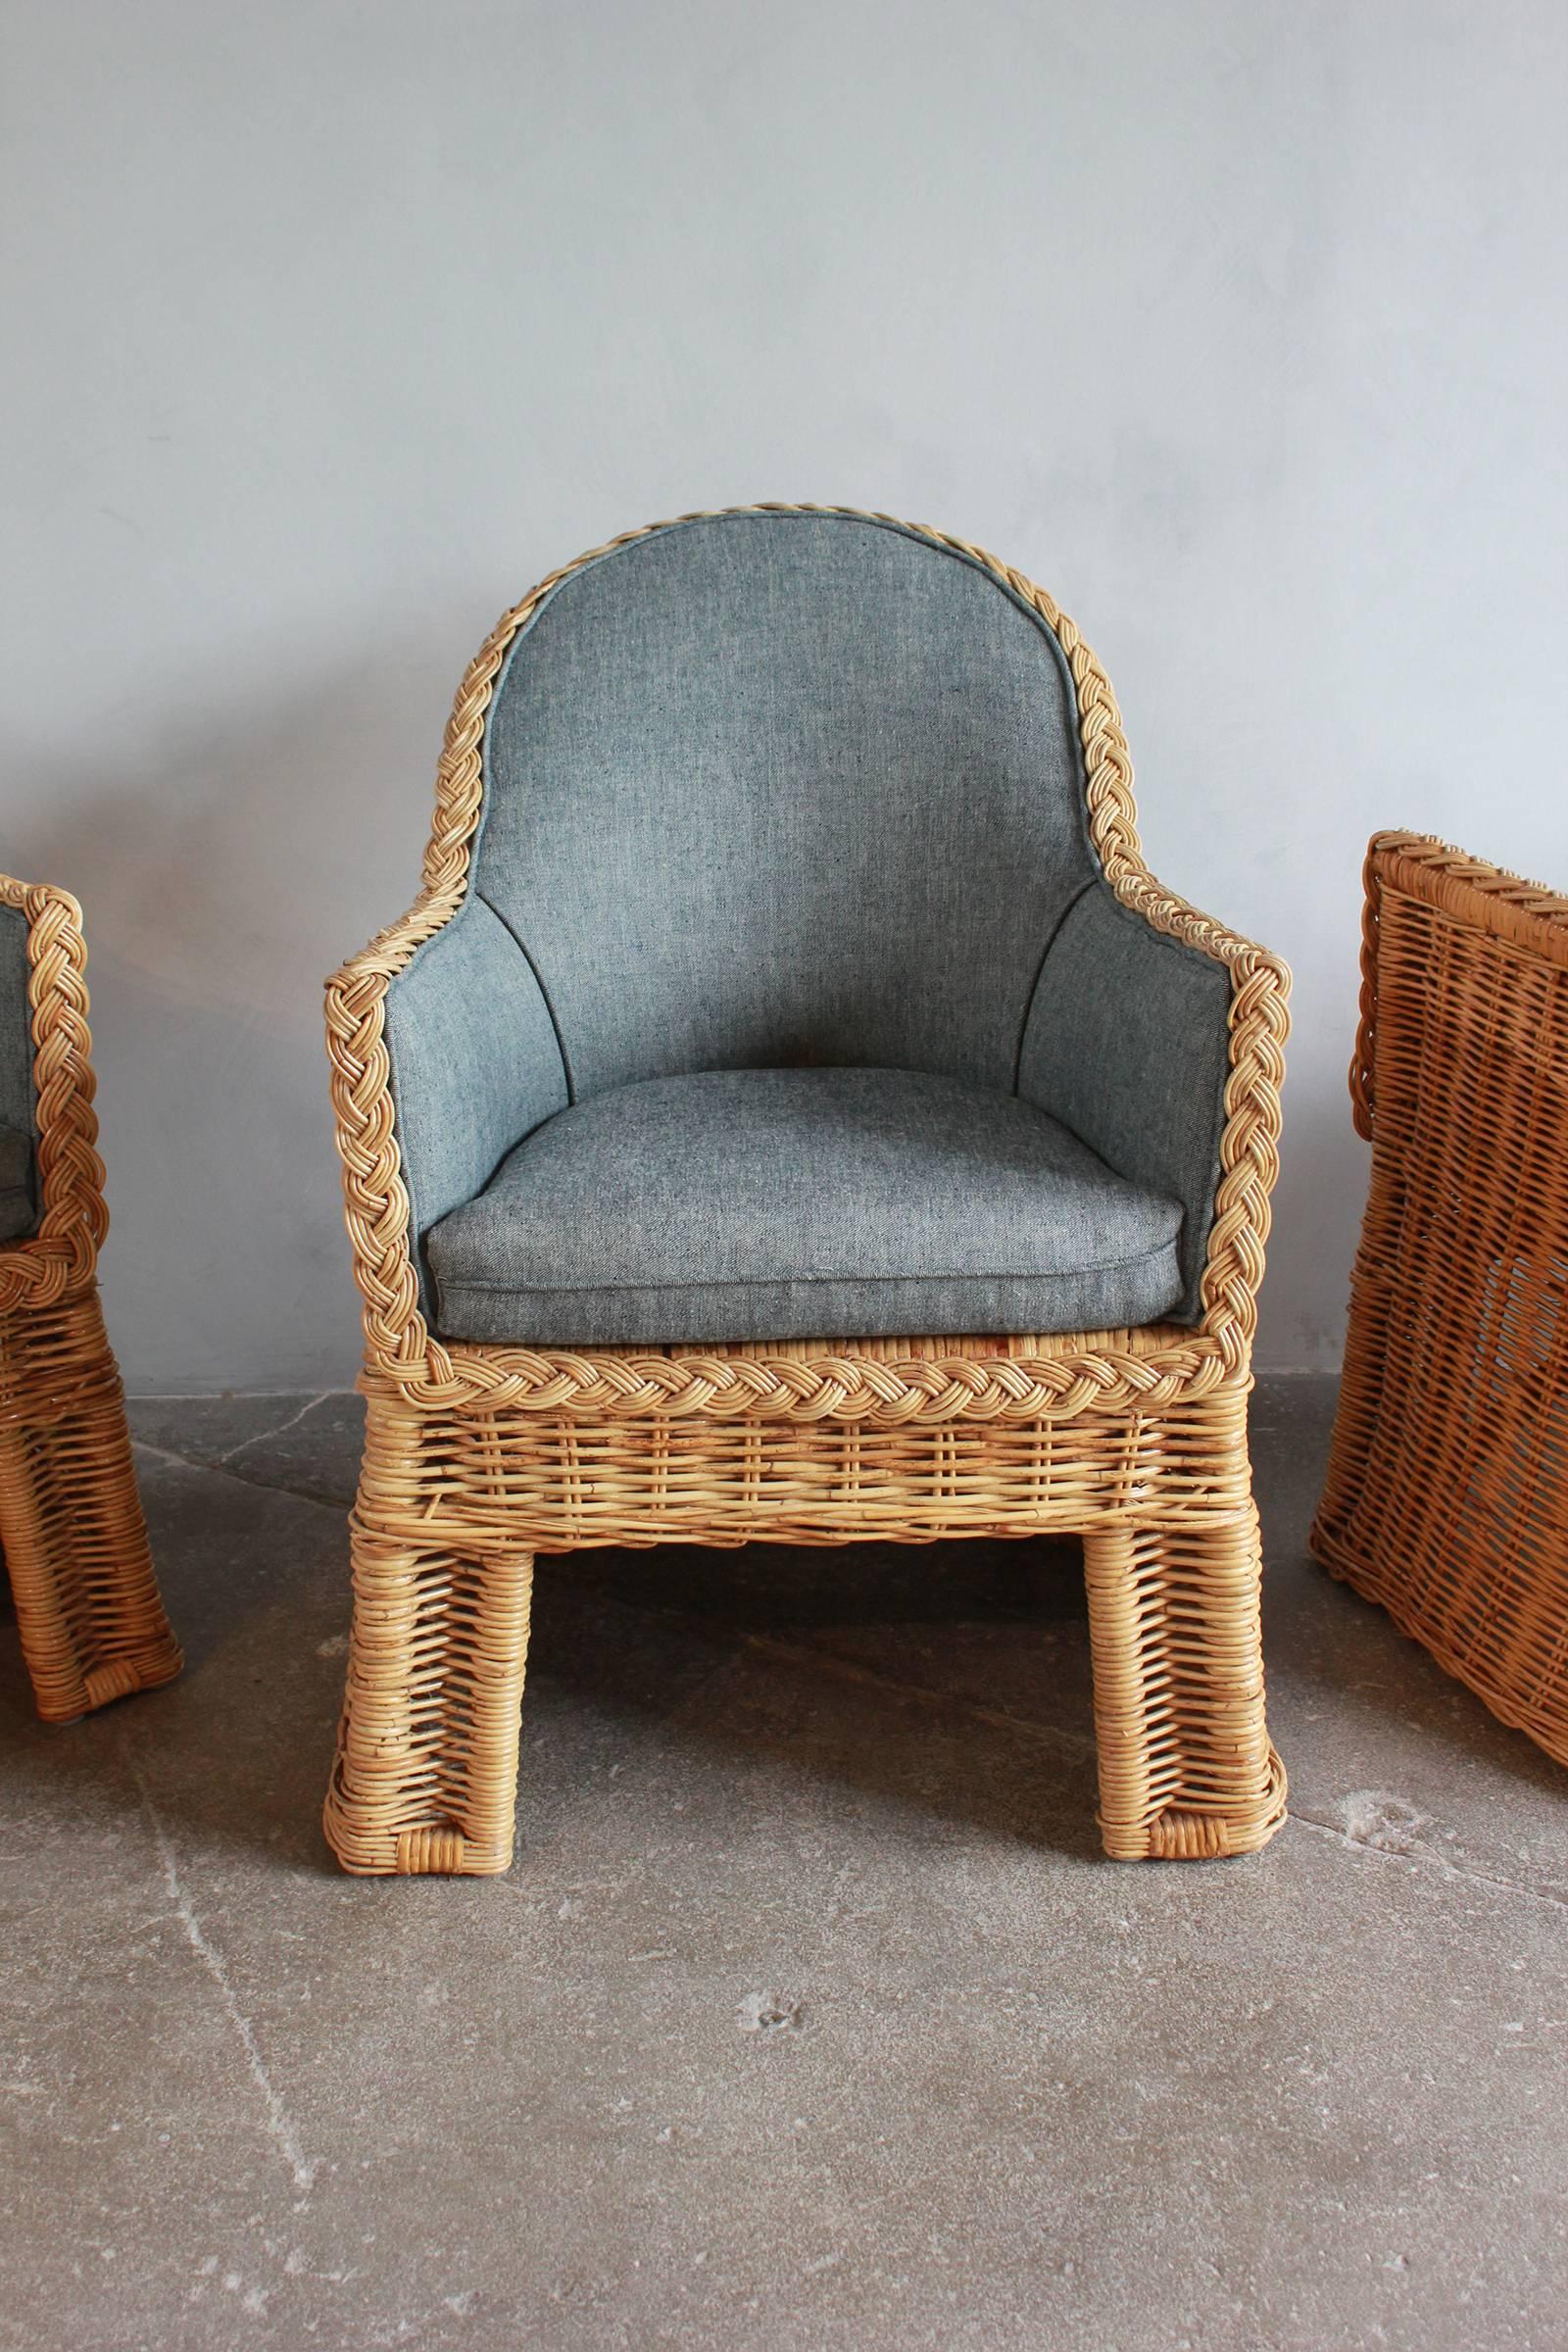 Late 20th Century Set of Four Oversized Wicker Dining Chairs Upholstered in Reverse Denim